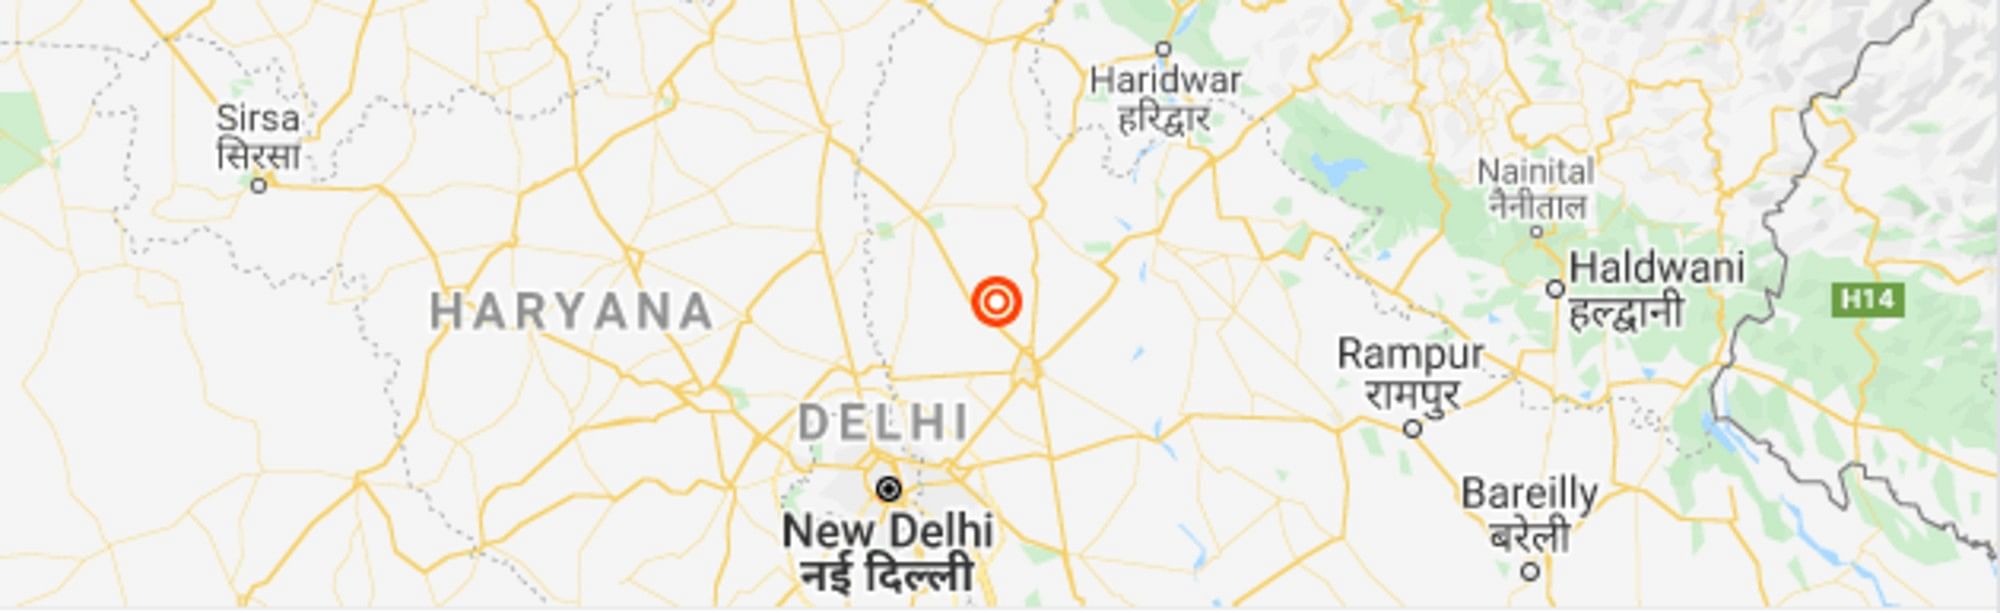 The epicentre of the earthquake is from a point that is 1 km from Kaland, Uttar Pradesh.